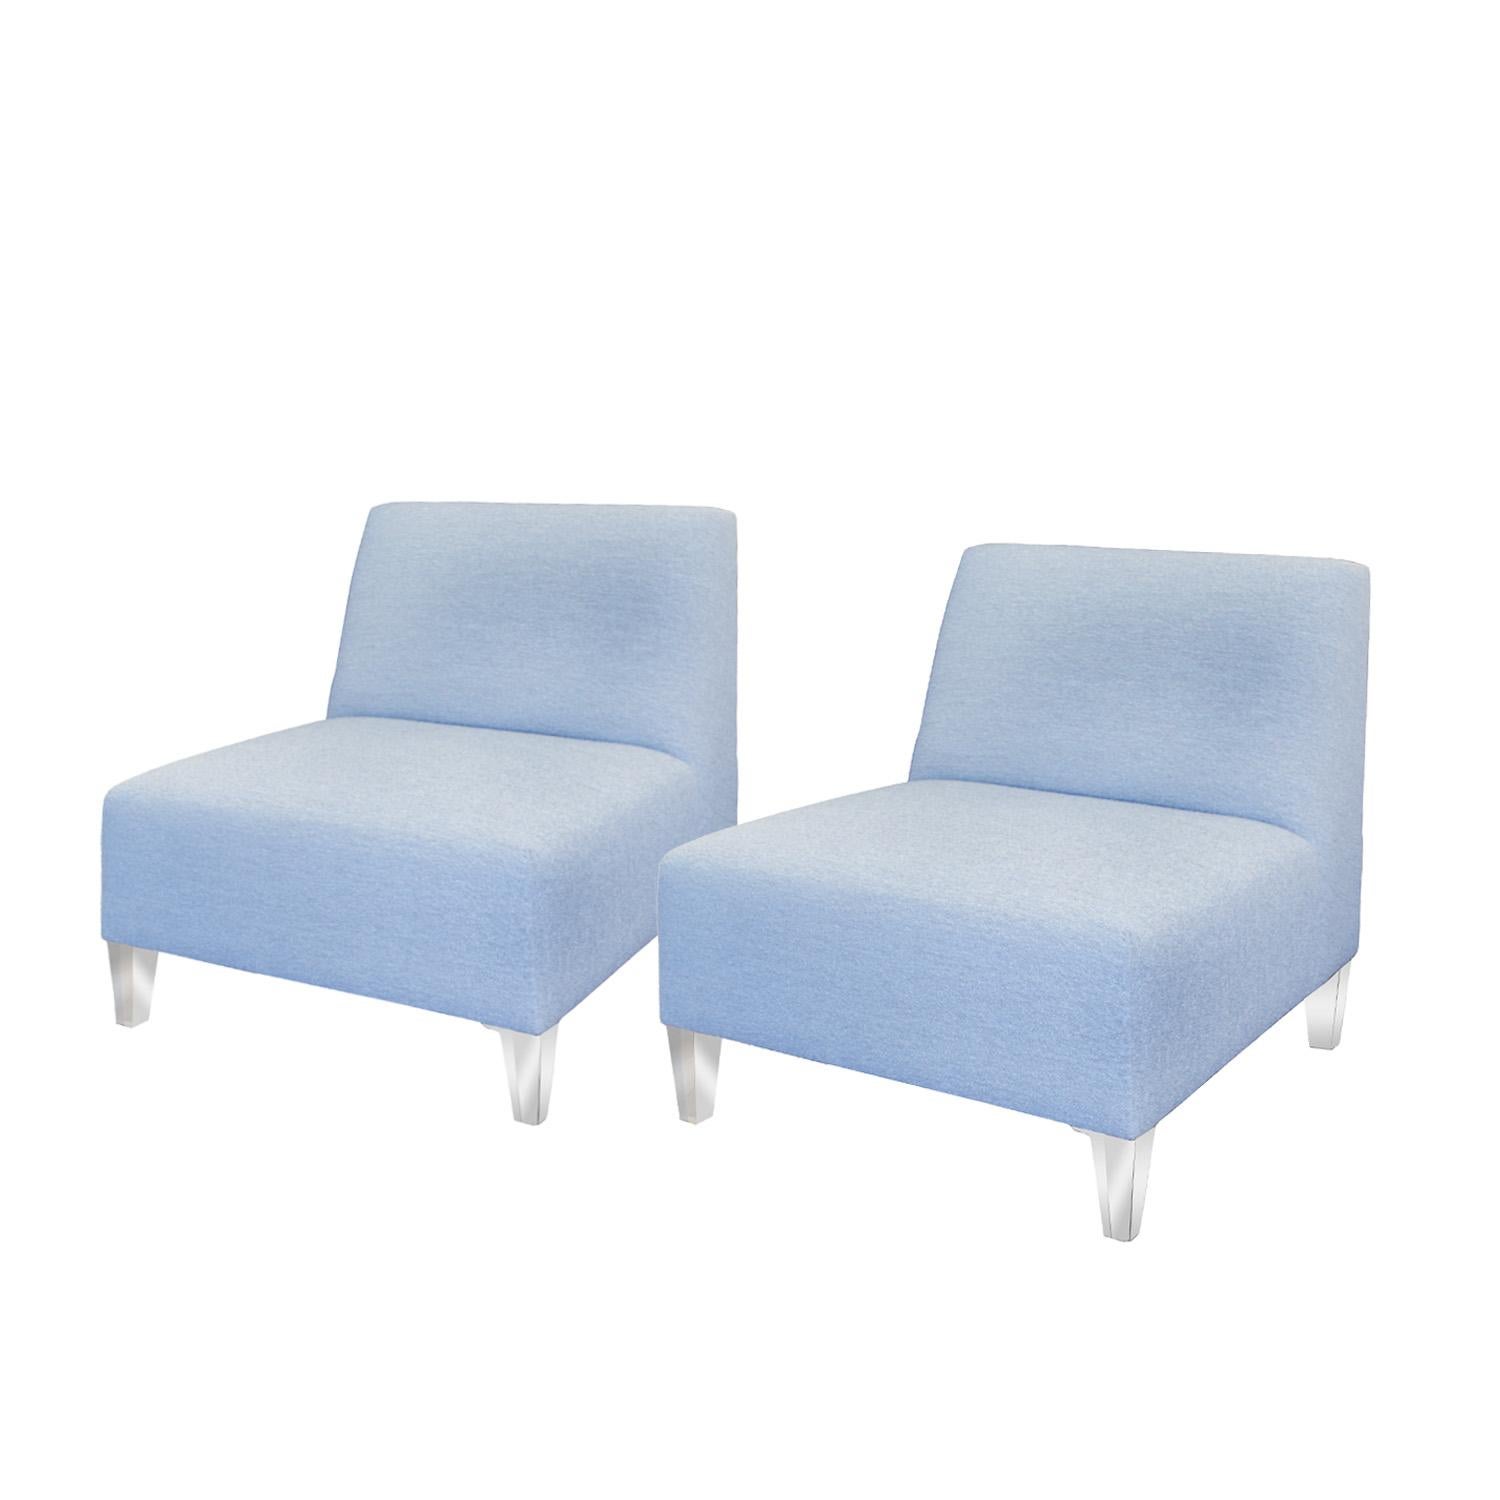 Pair of deep slipper chairs with Lucite legs. Newly recovered in blue boucle by Venfield.